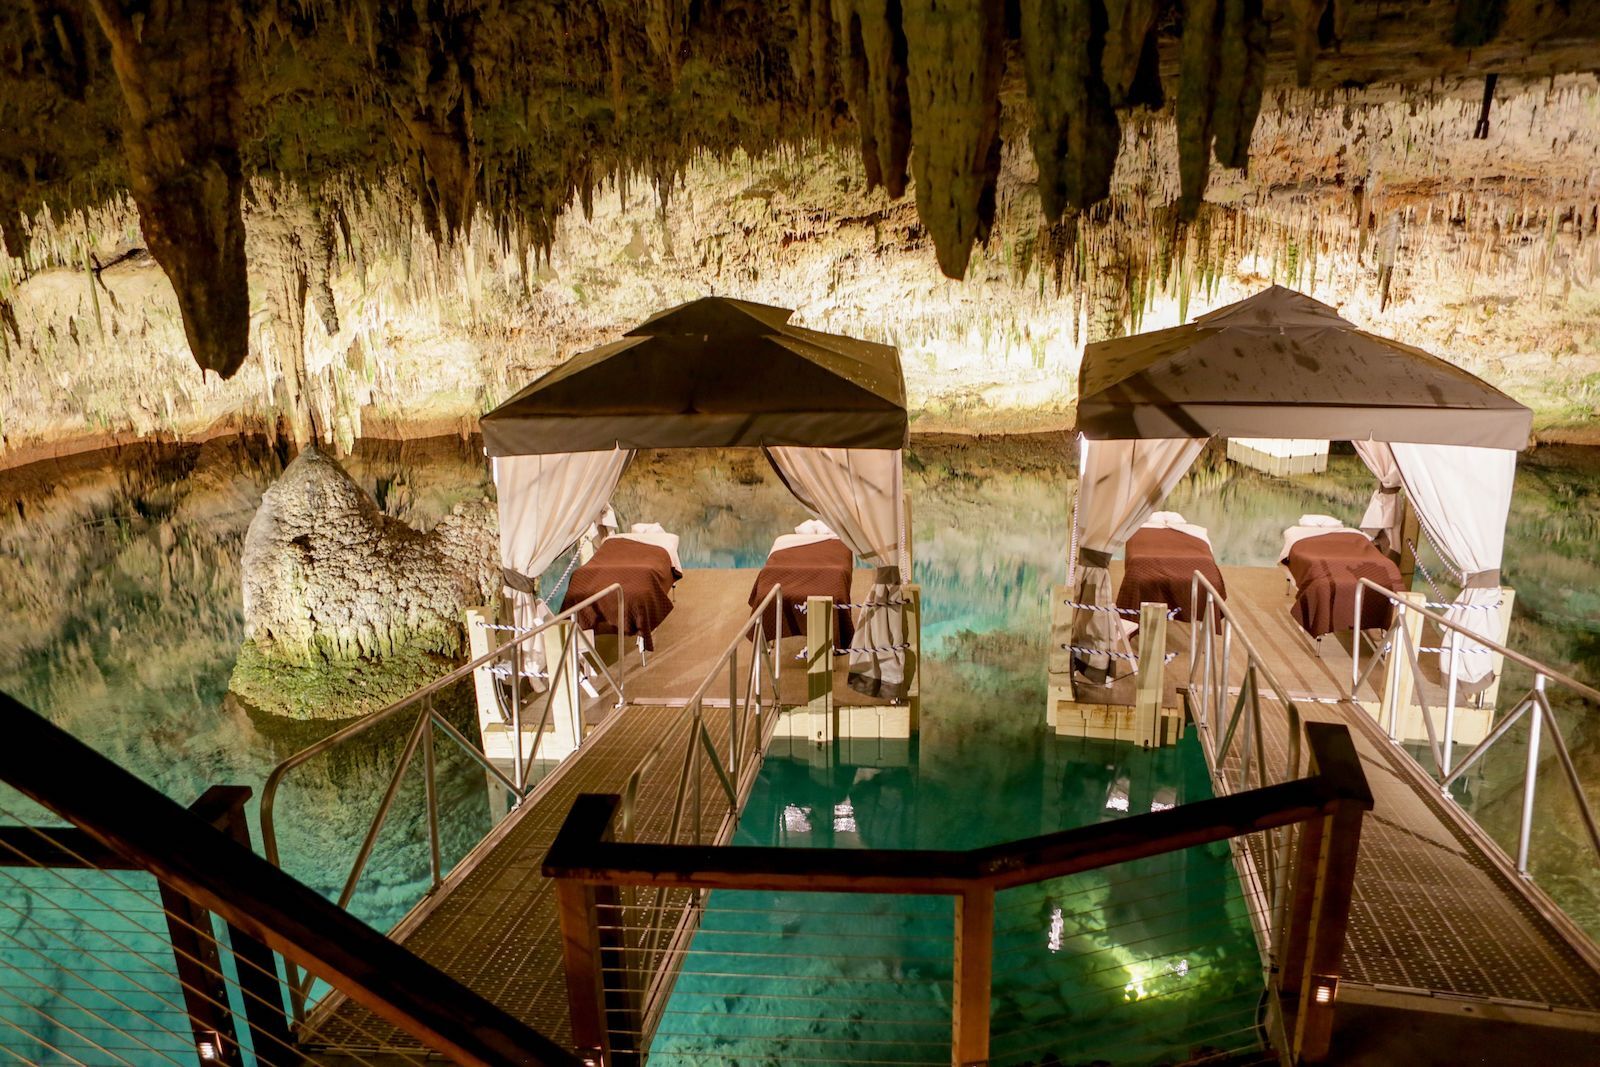 Bermuda Cave - prosperos cave, now a spa with floating massage platforms